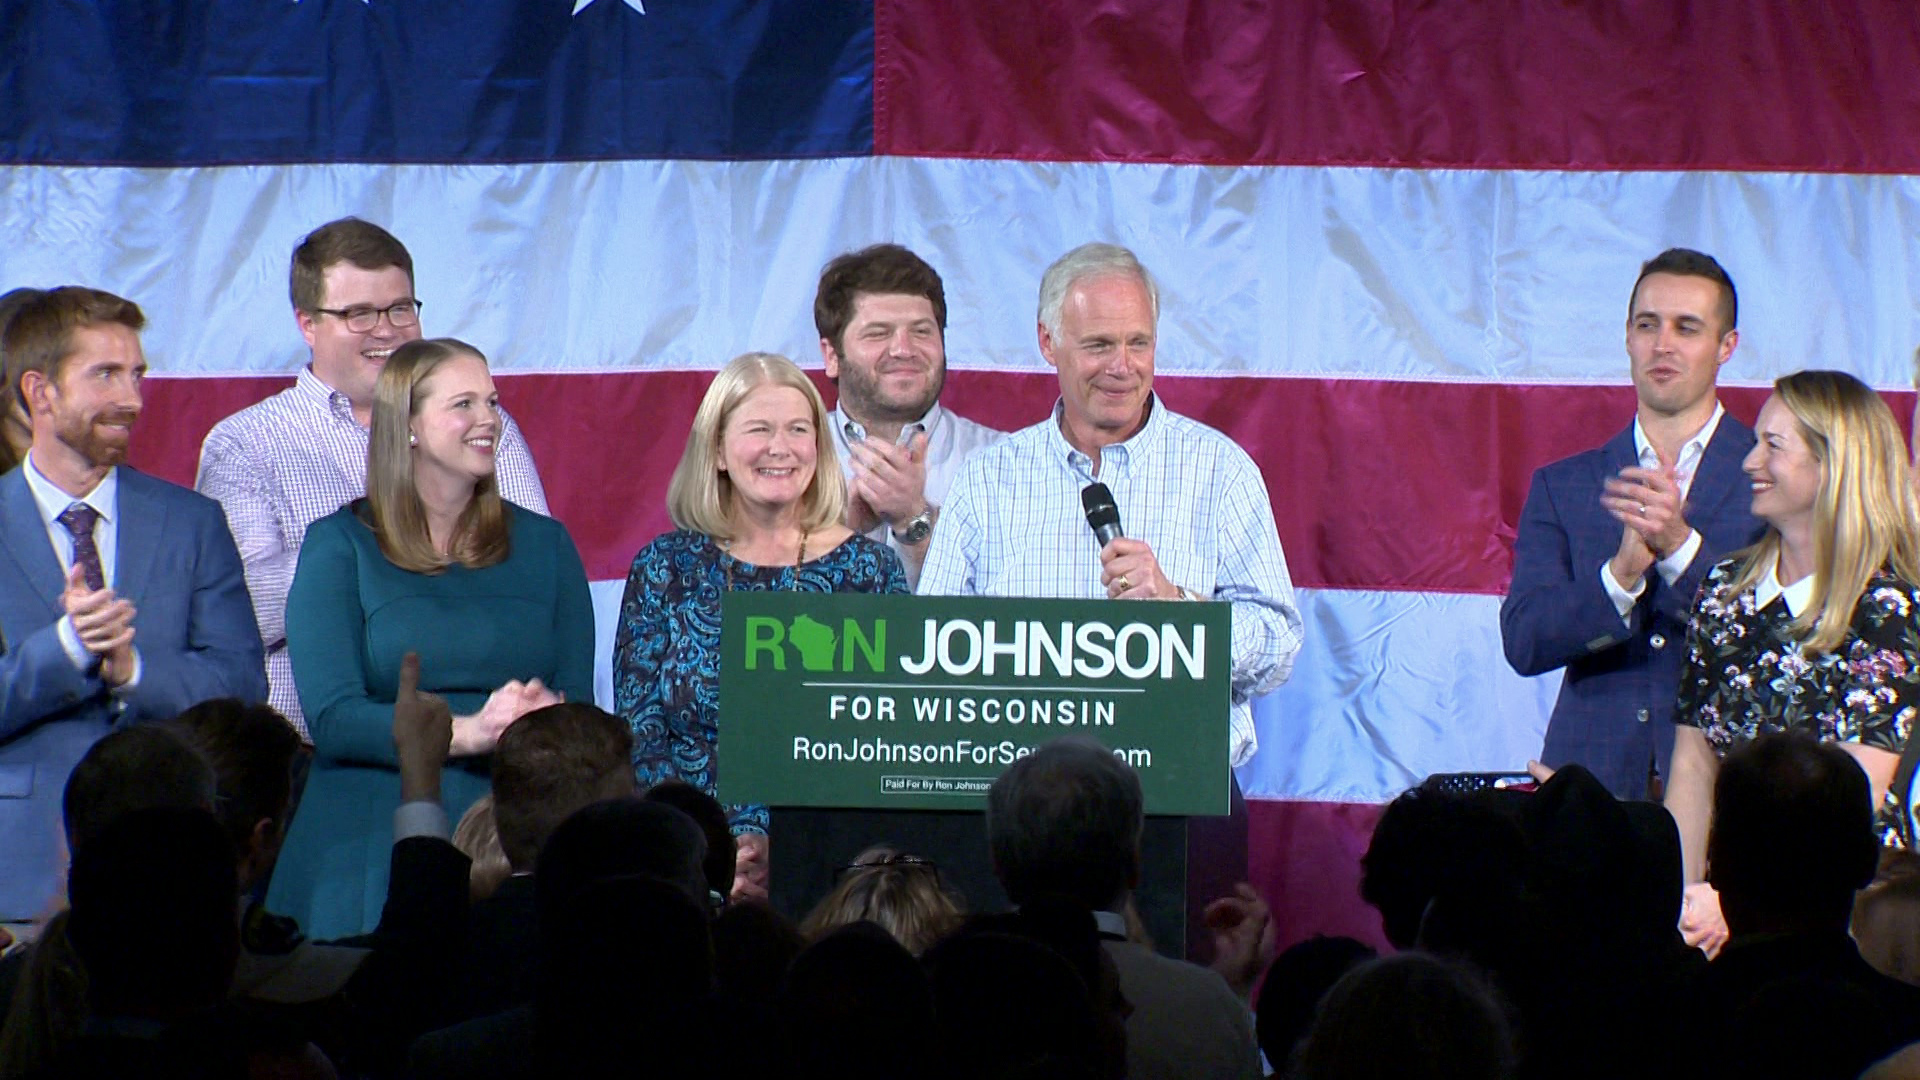 Ron Johnson stands behind a podium with a sign reading "Ron Johnson For Wisconsin" and holds a microphone while speaking, with applauding people standing around him and facing him in the foreground, and with a large U.S. flag as a backdrop in the background.